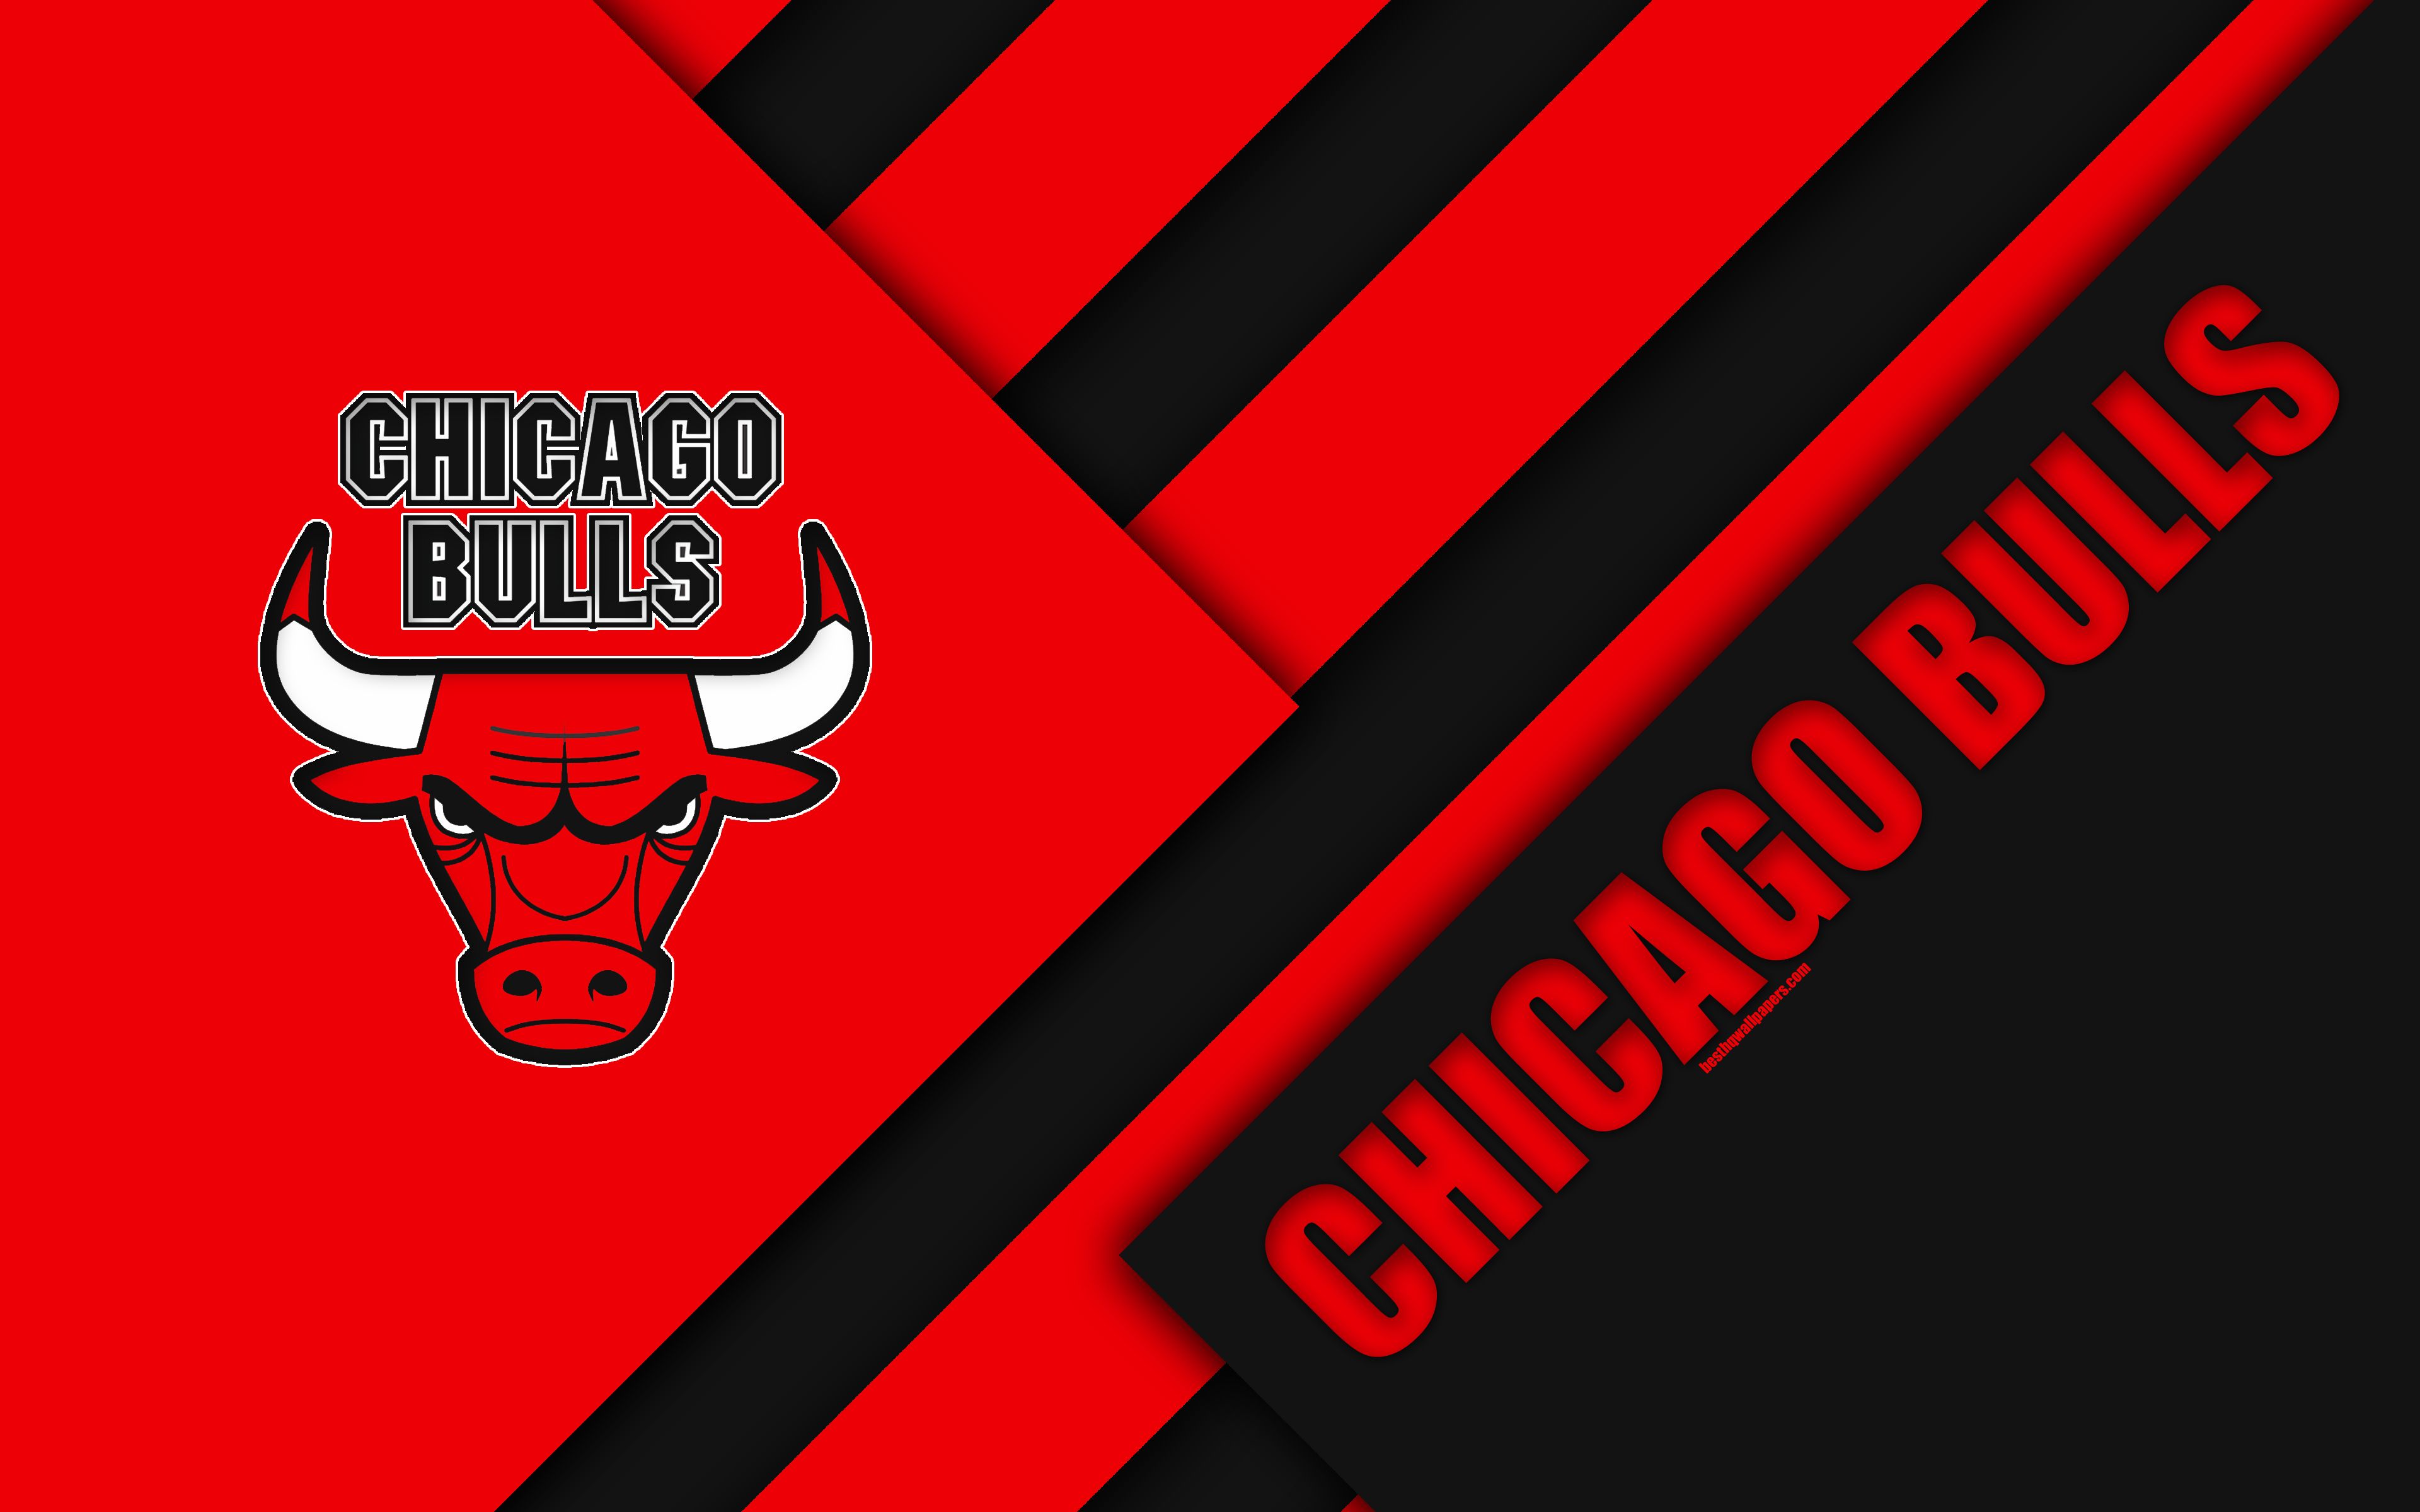 Chicago Bulls Logo Wallpapers Hd posted by John Anderson